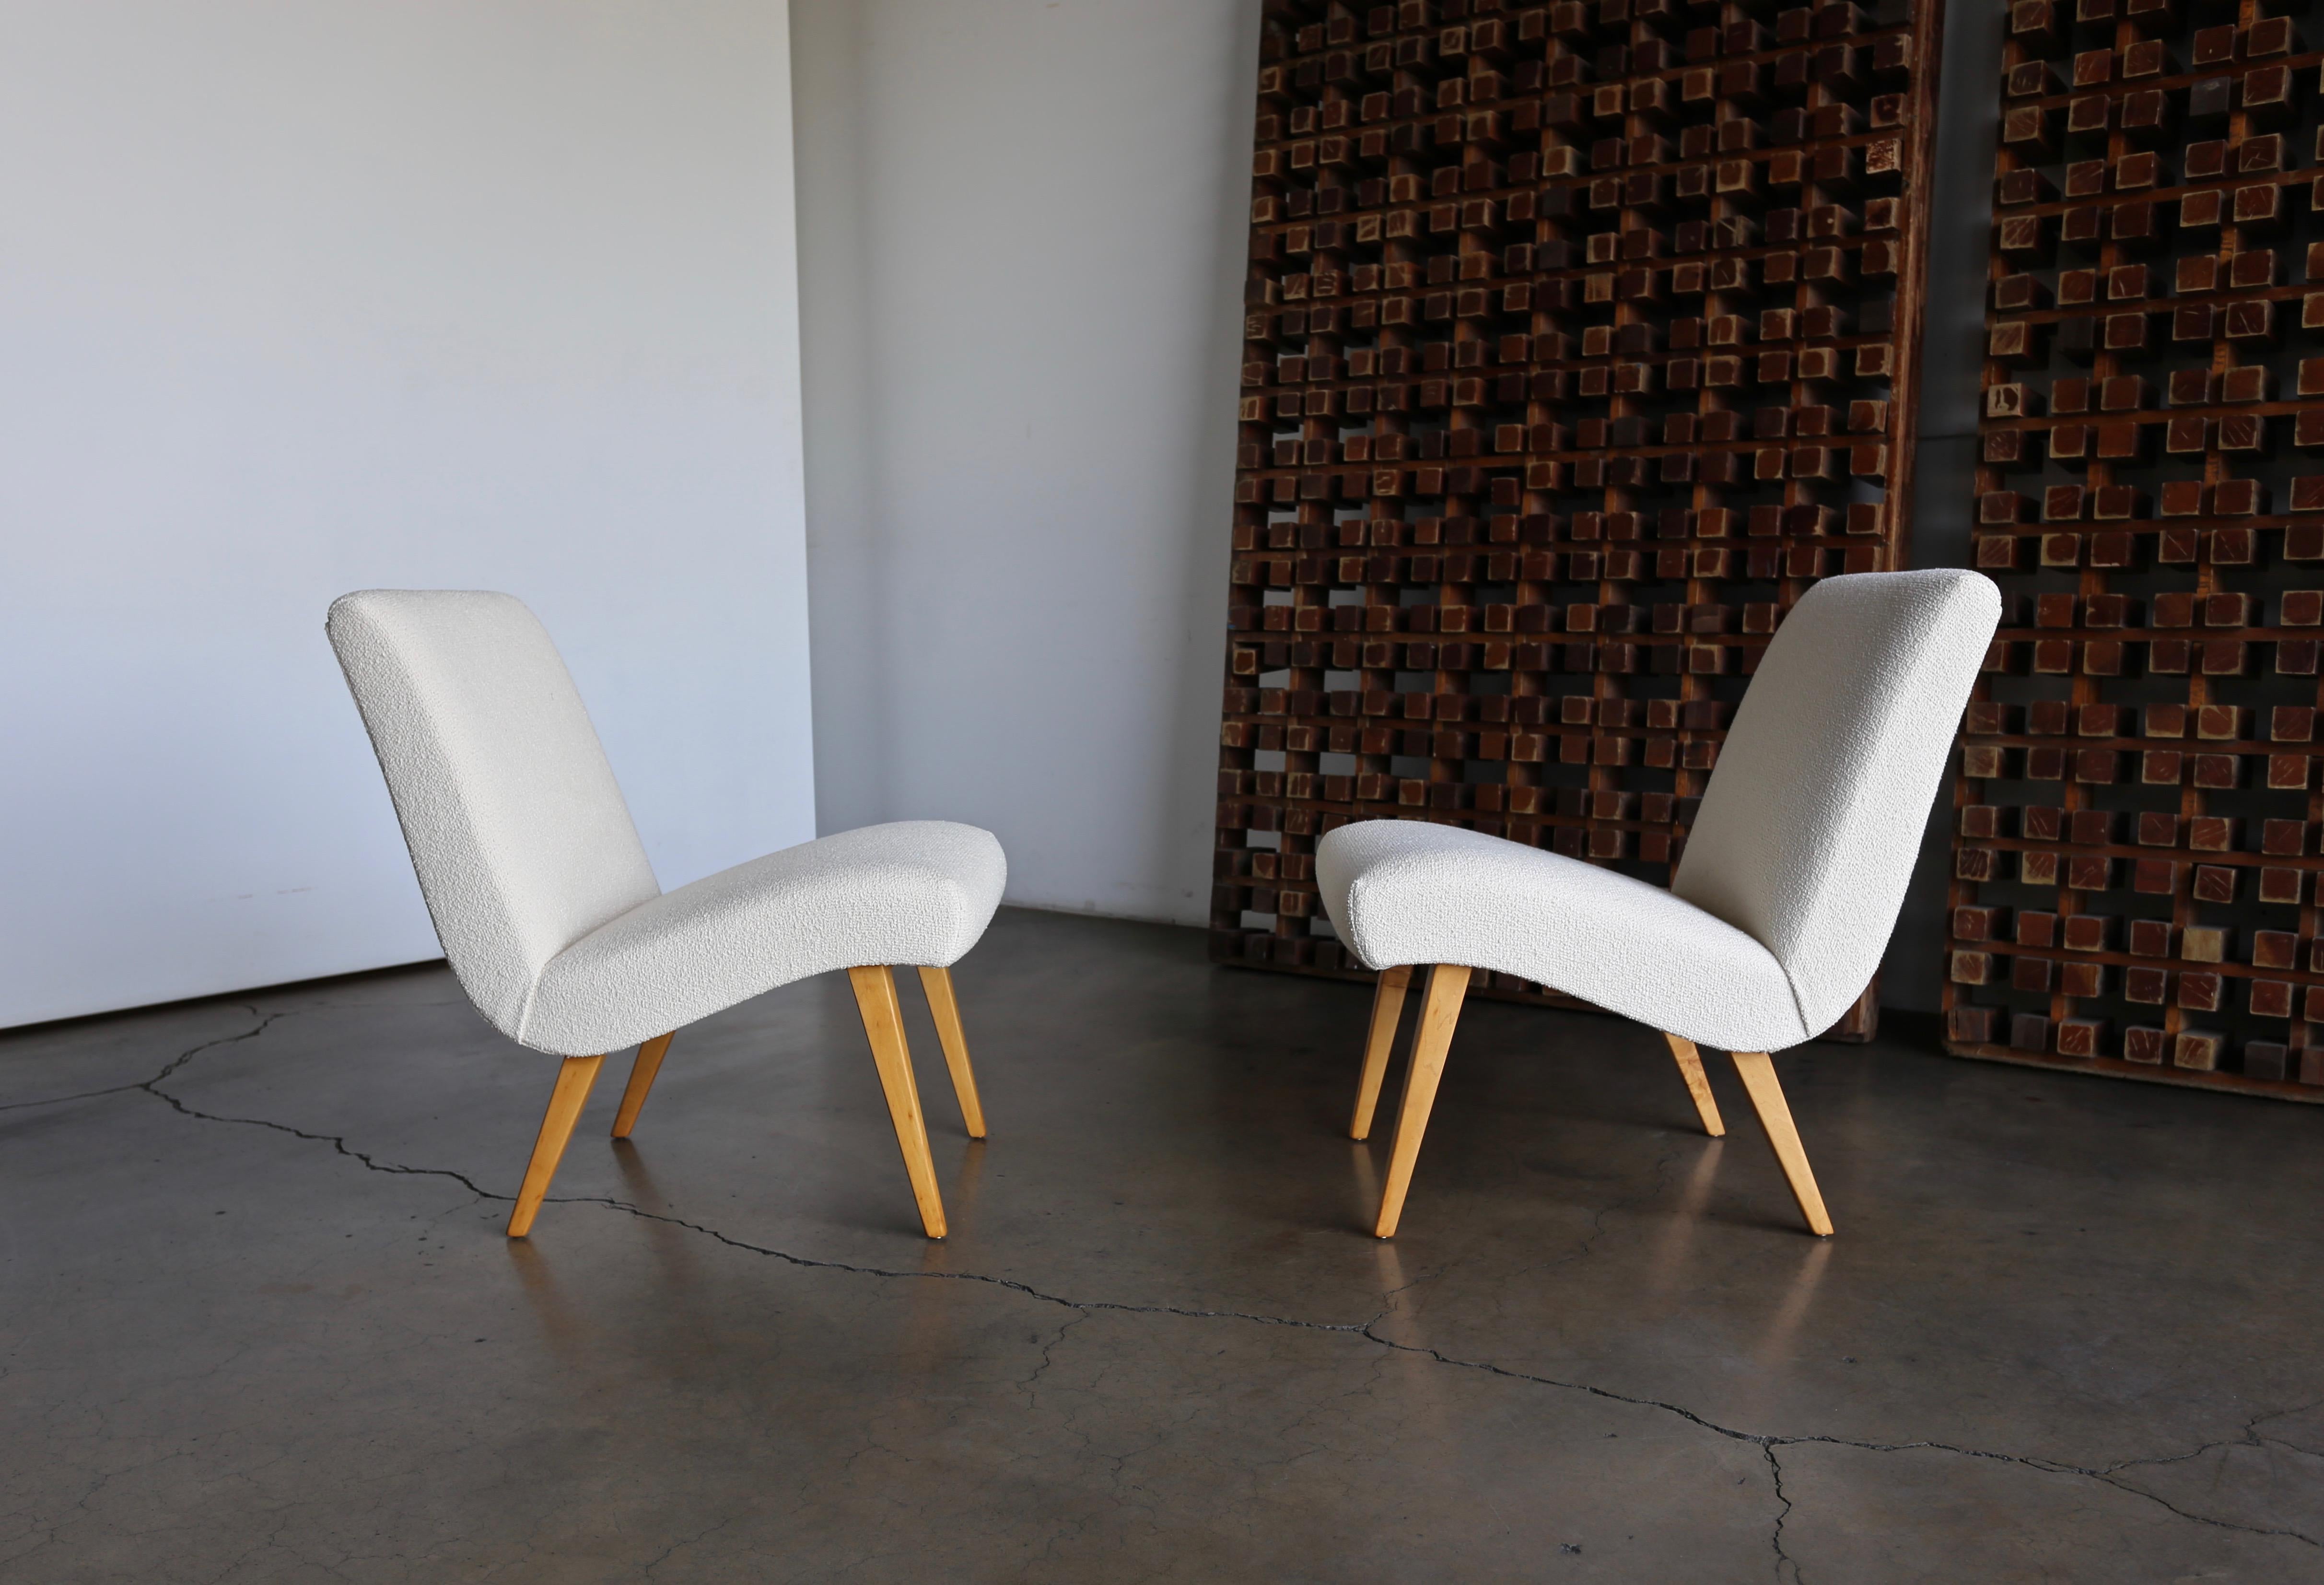 Jens Risom Slipper lounge chairs for Knoll circa 1950. This pair has been professionally restored.